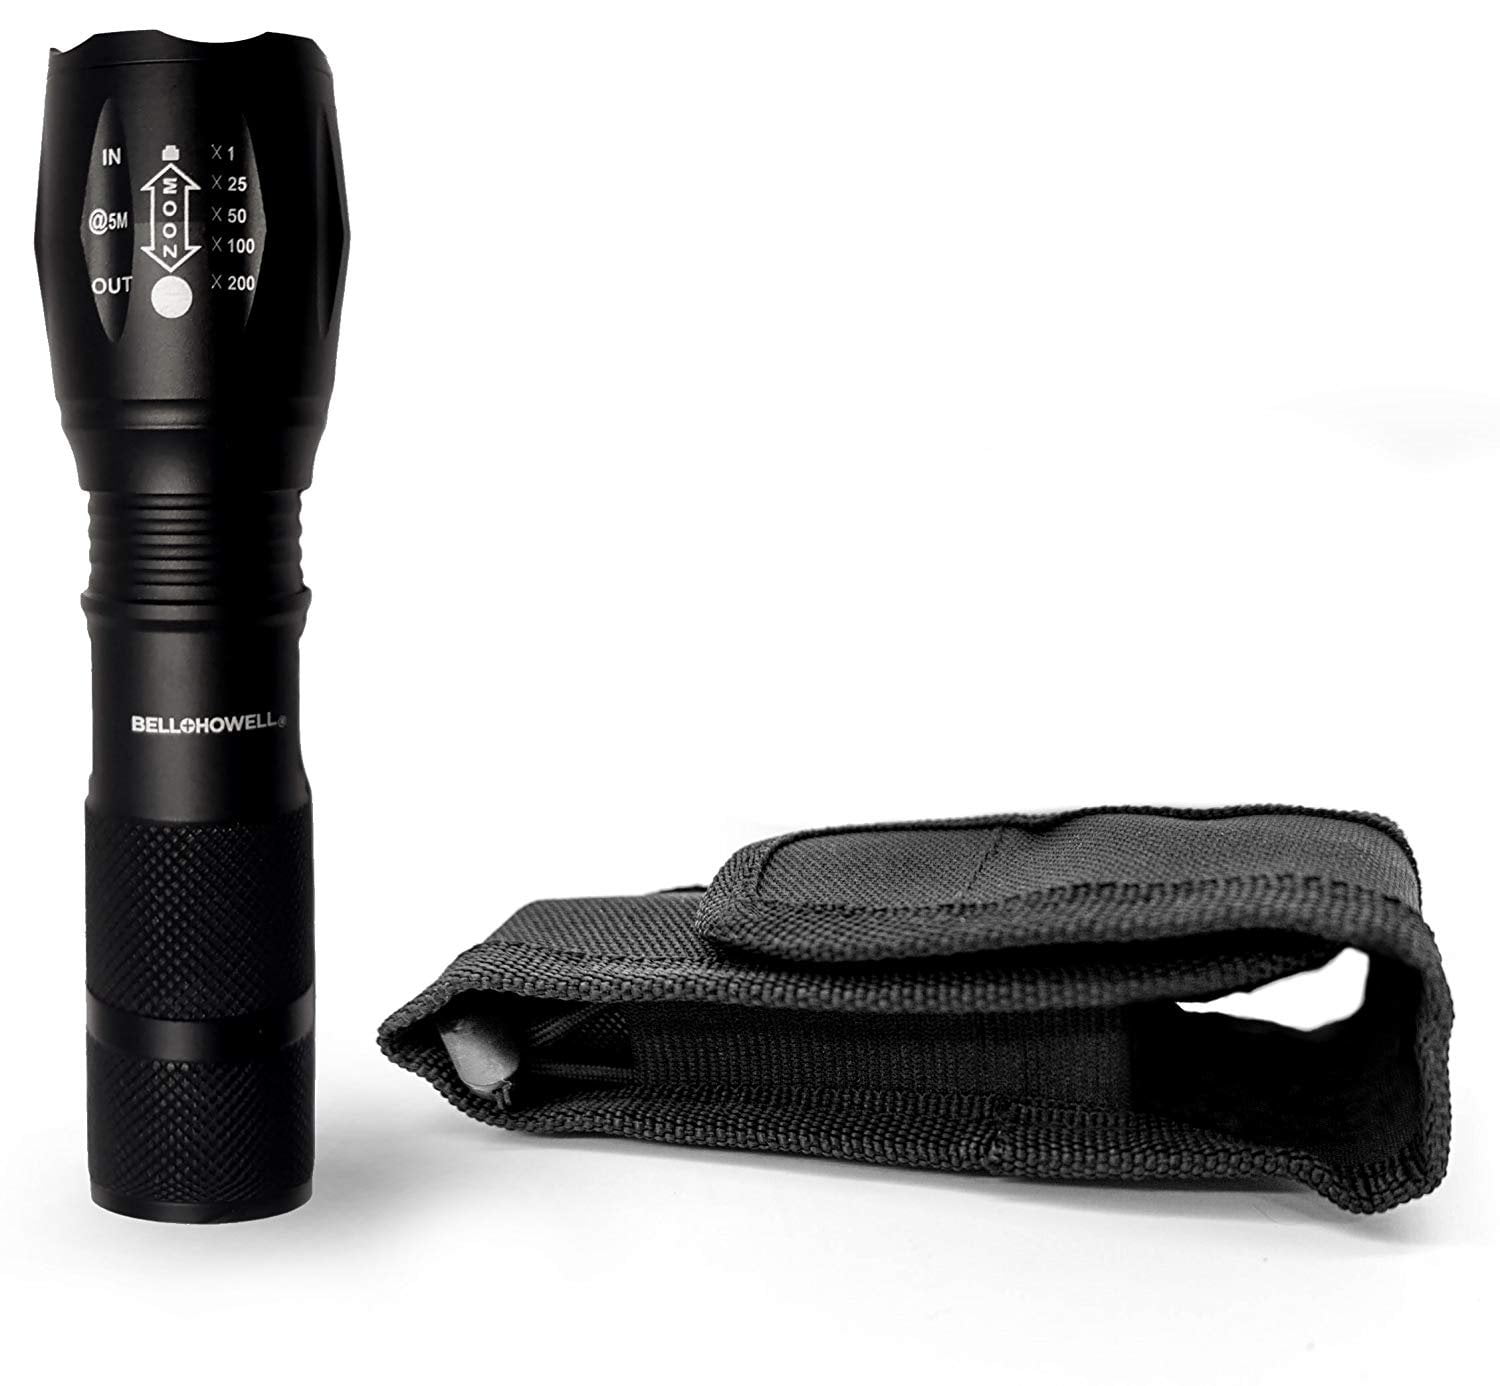 Bell Howell TACLIGHT FLASHLIGHT Military-Grade, Magnetic Base w/Holster,  Modes  Zoom Function As Seen On TV 40x Brighter